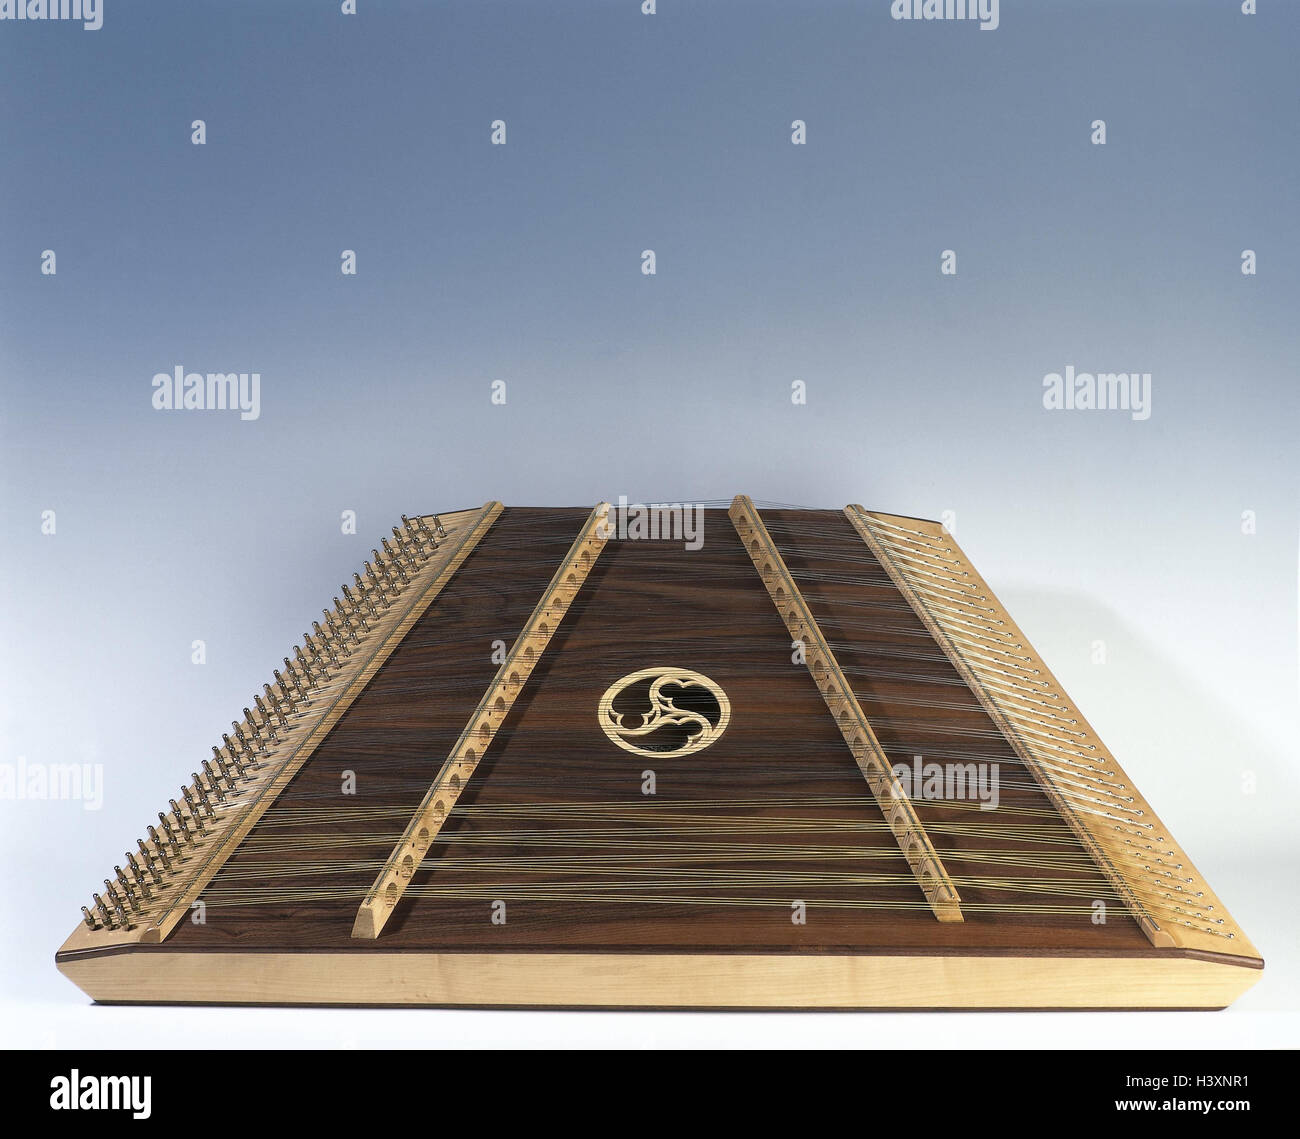 Dulcimer musical instrument, instrument, music, stringed instrument, folk music, studio, cut out, product photography, Stock Photo